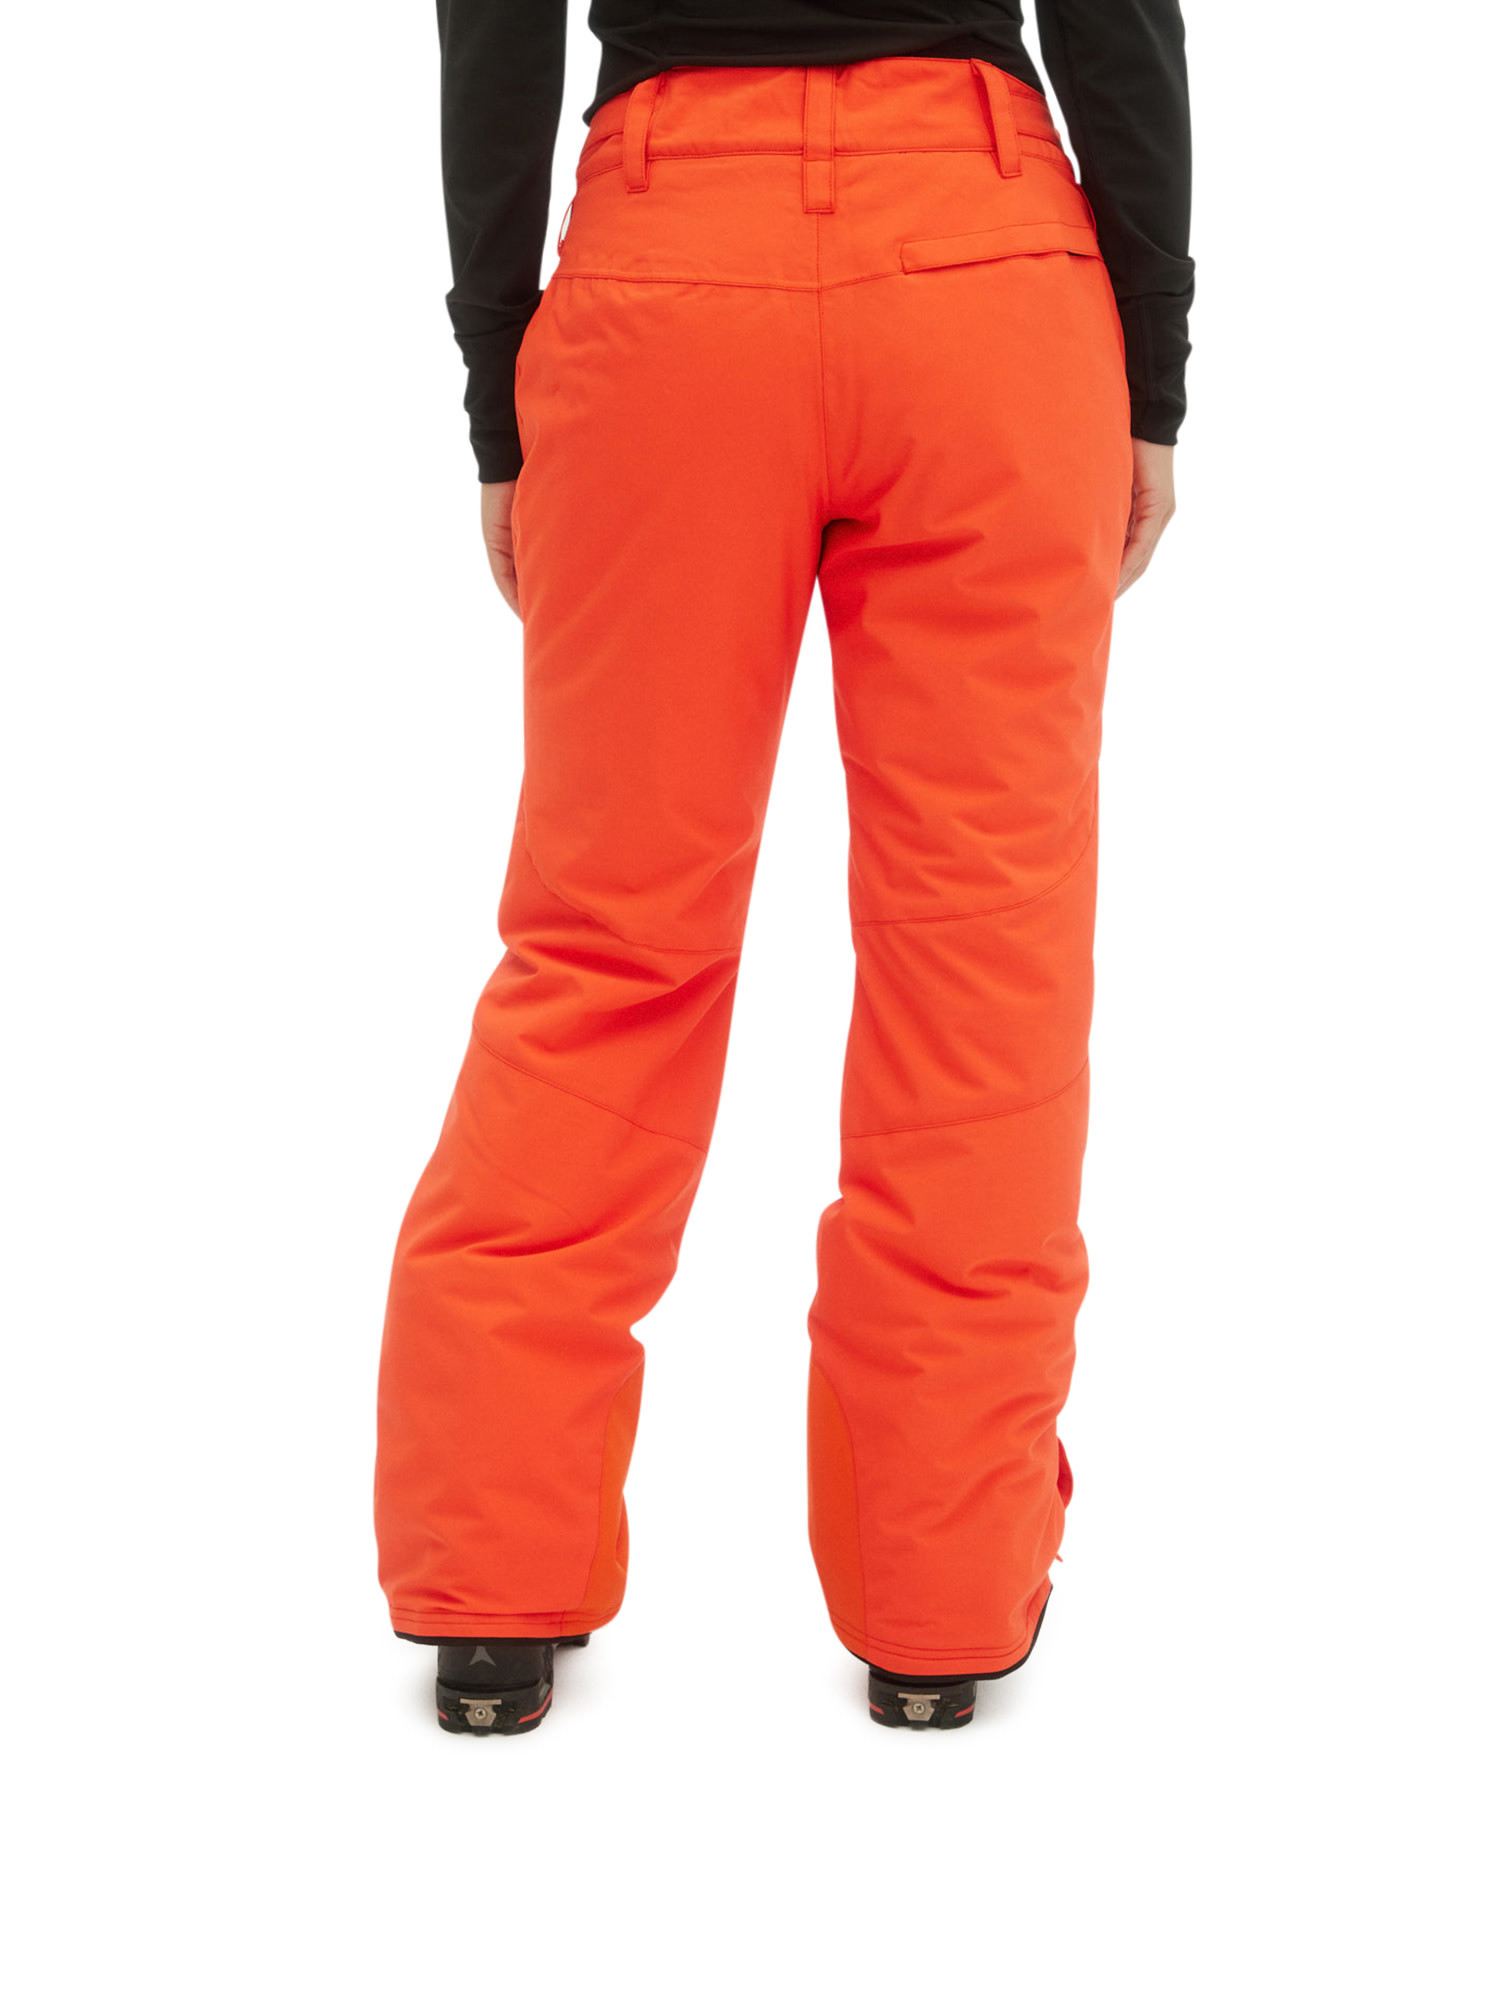 Star Insulated | Women's Snow Pants